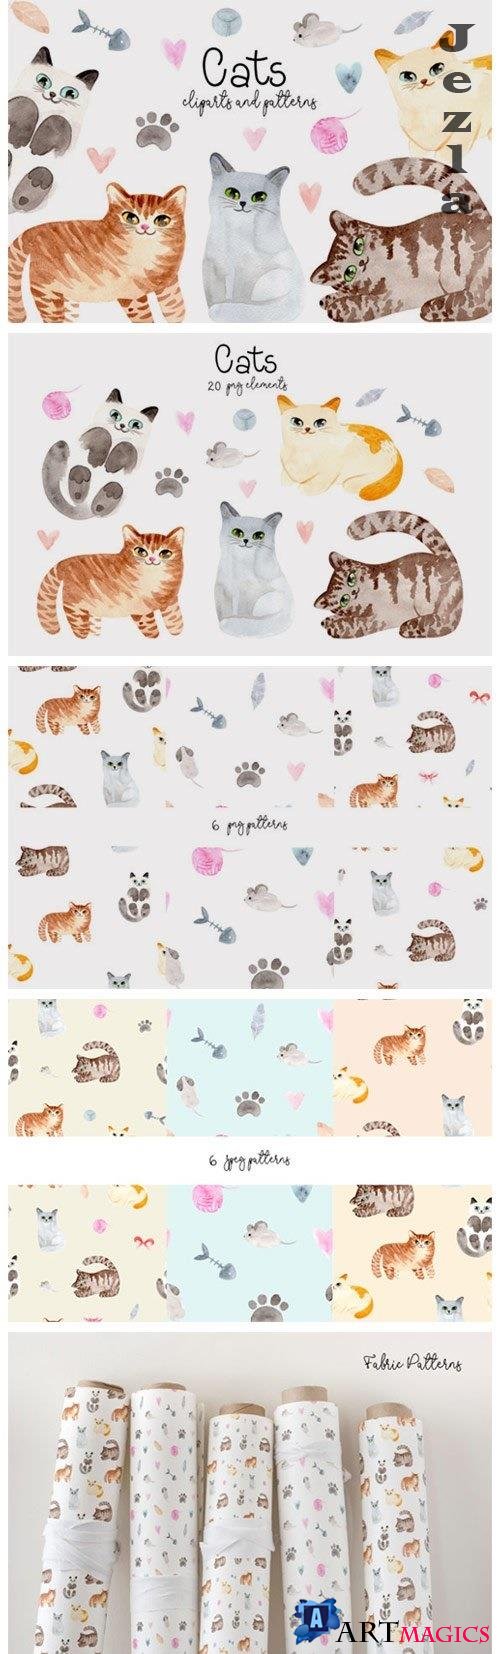 Watercolor Cute Cats. Patterns - 4181182